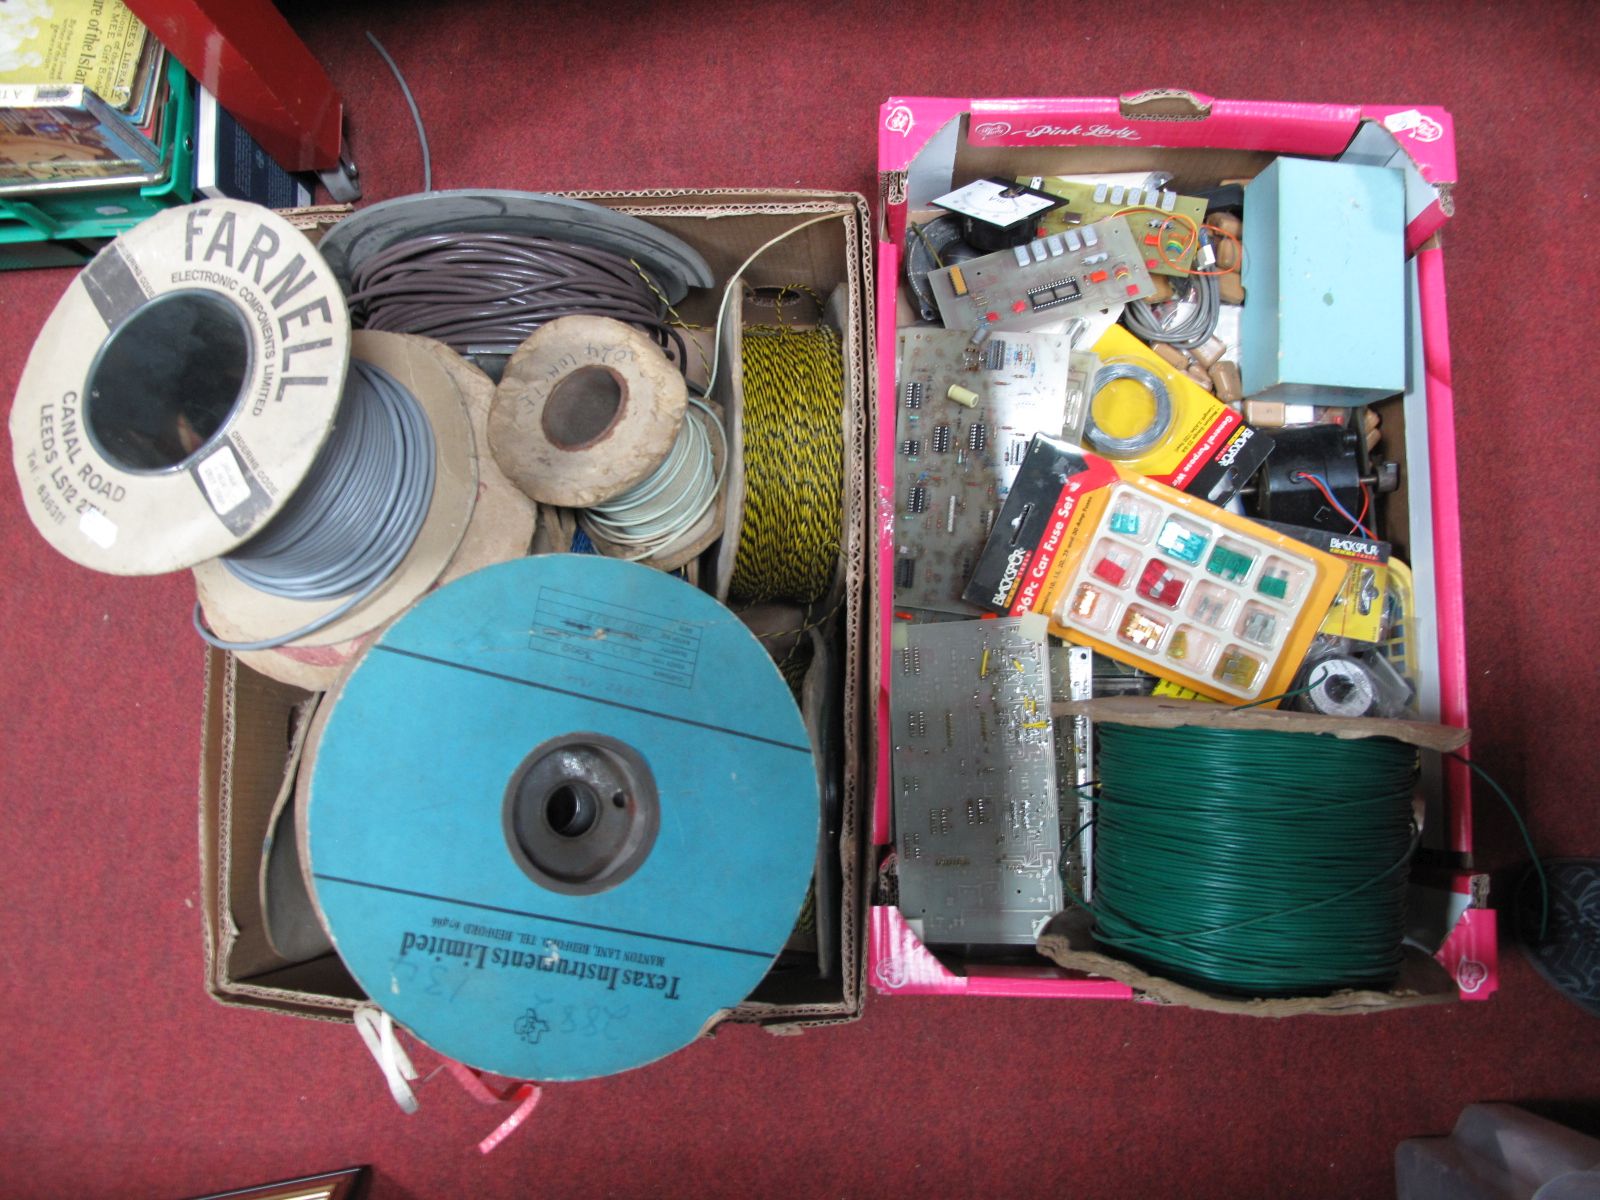 Electricians Wire Reels, cable, circuit boards, copper tinned wire, magnetic pick up and other